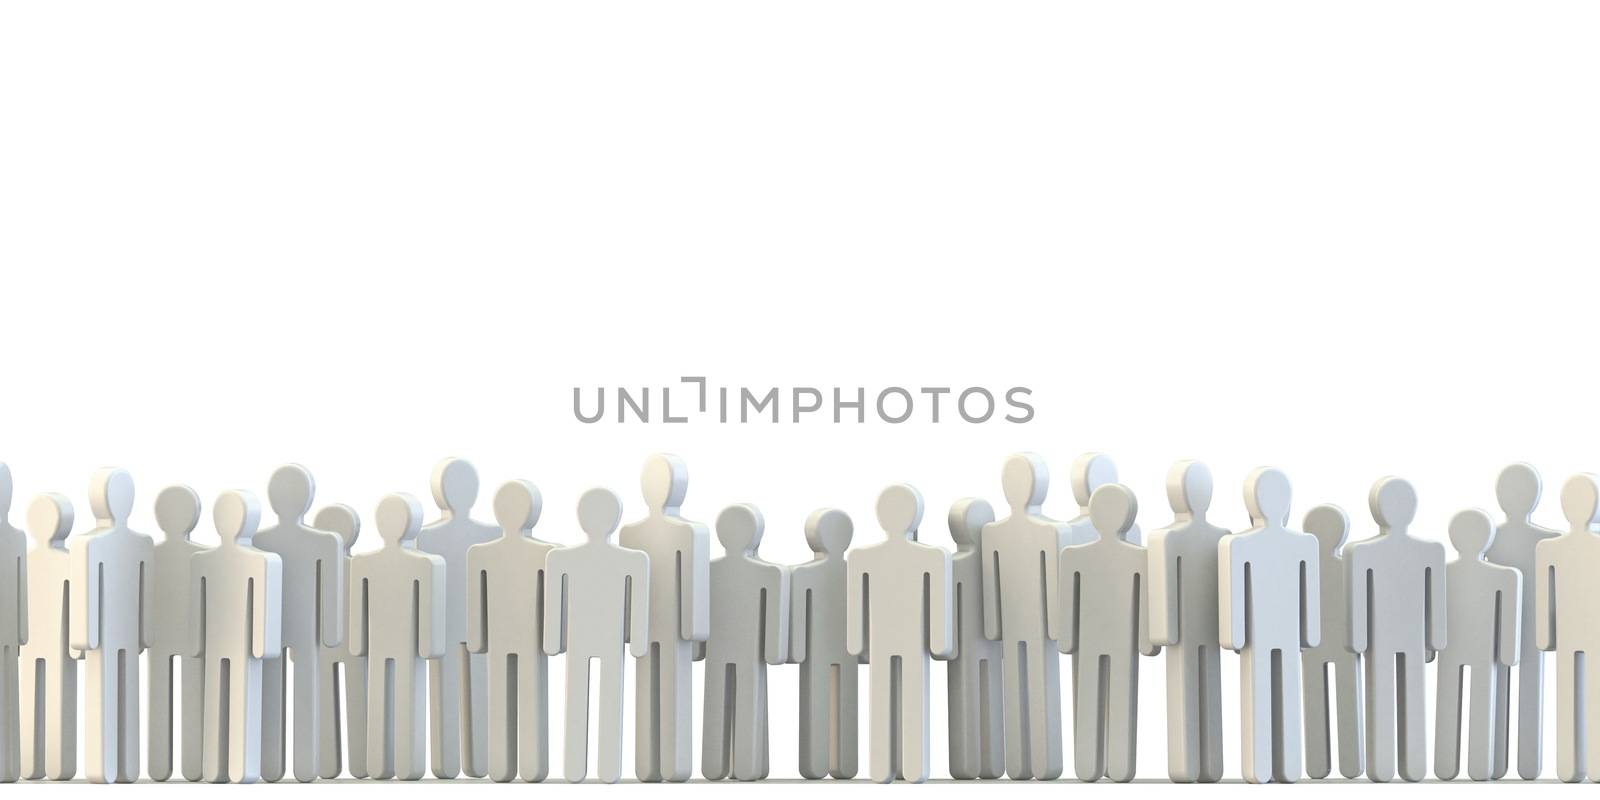 Crowd people 3D render illustration isolated on white background